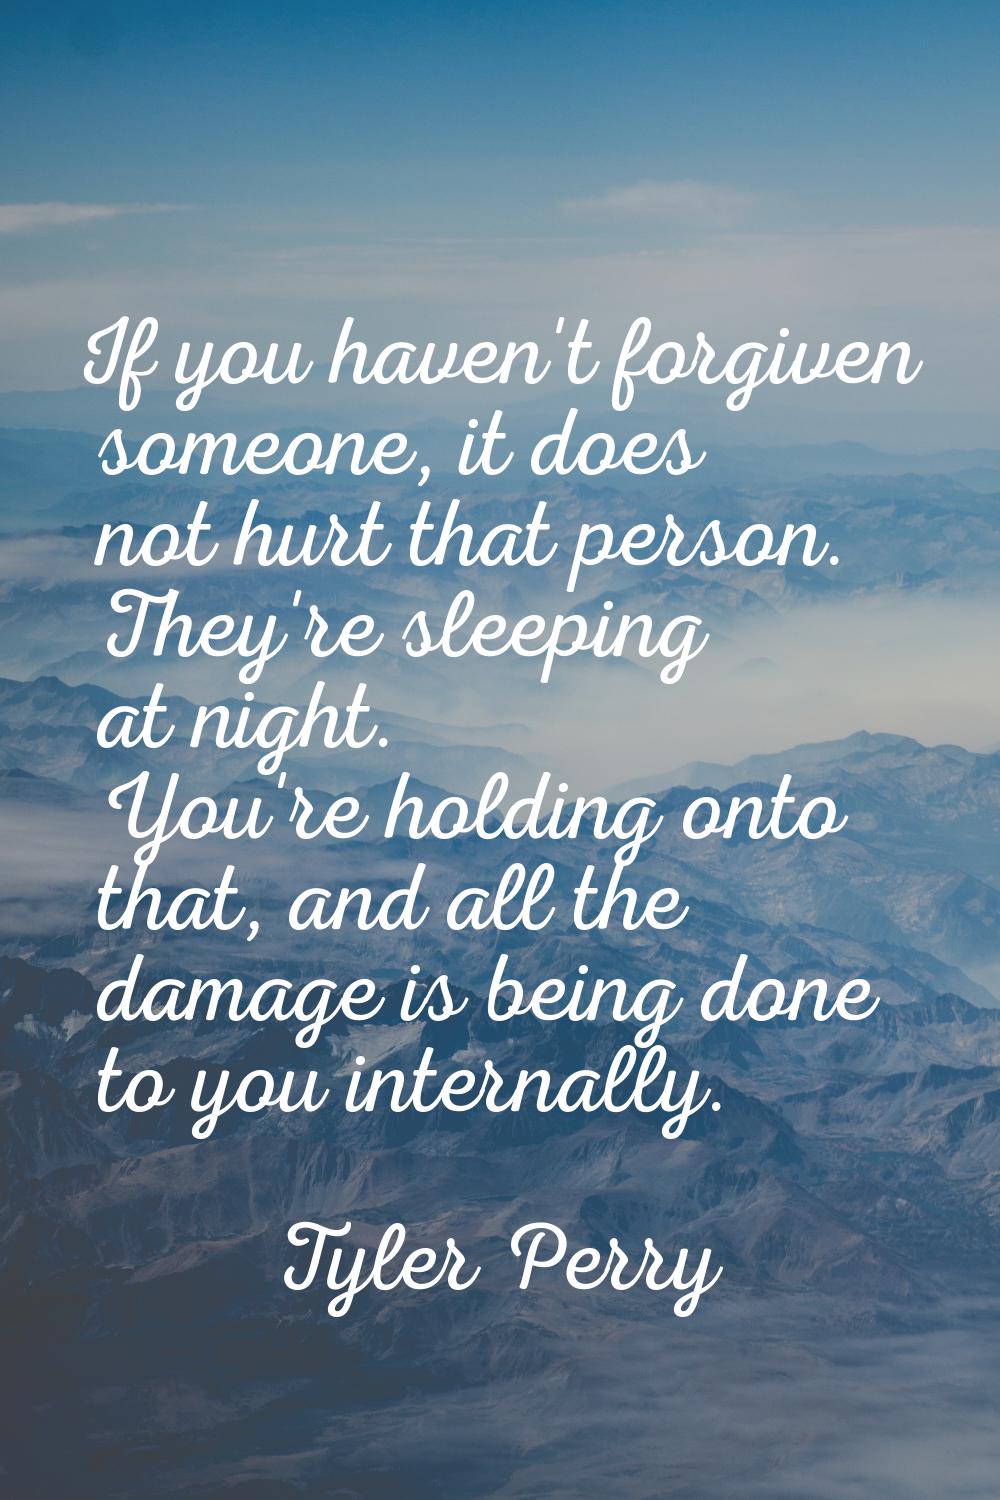 If you haven't forgiven someone, it does not hurt that person. They're sleeping at night. You're ho